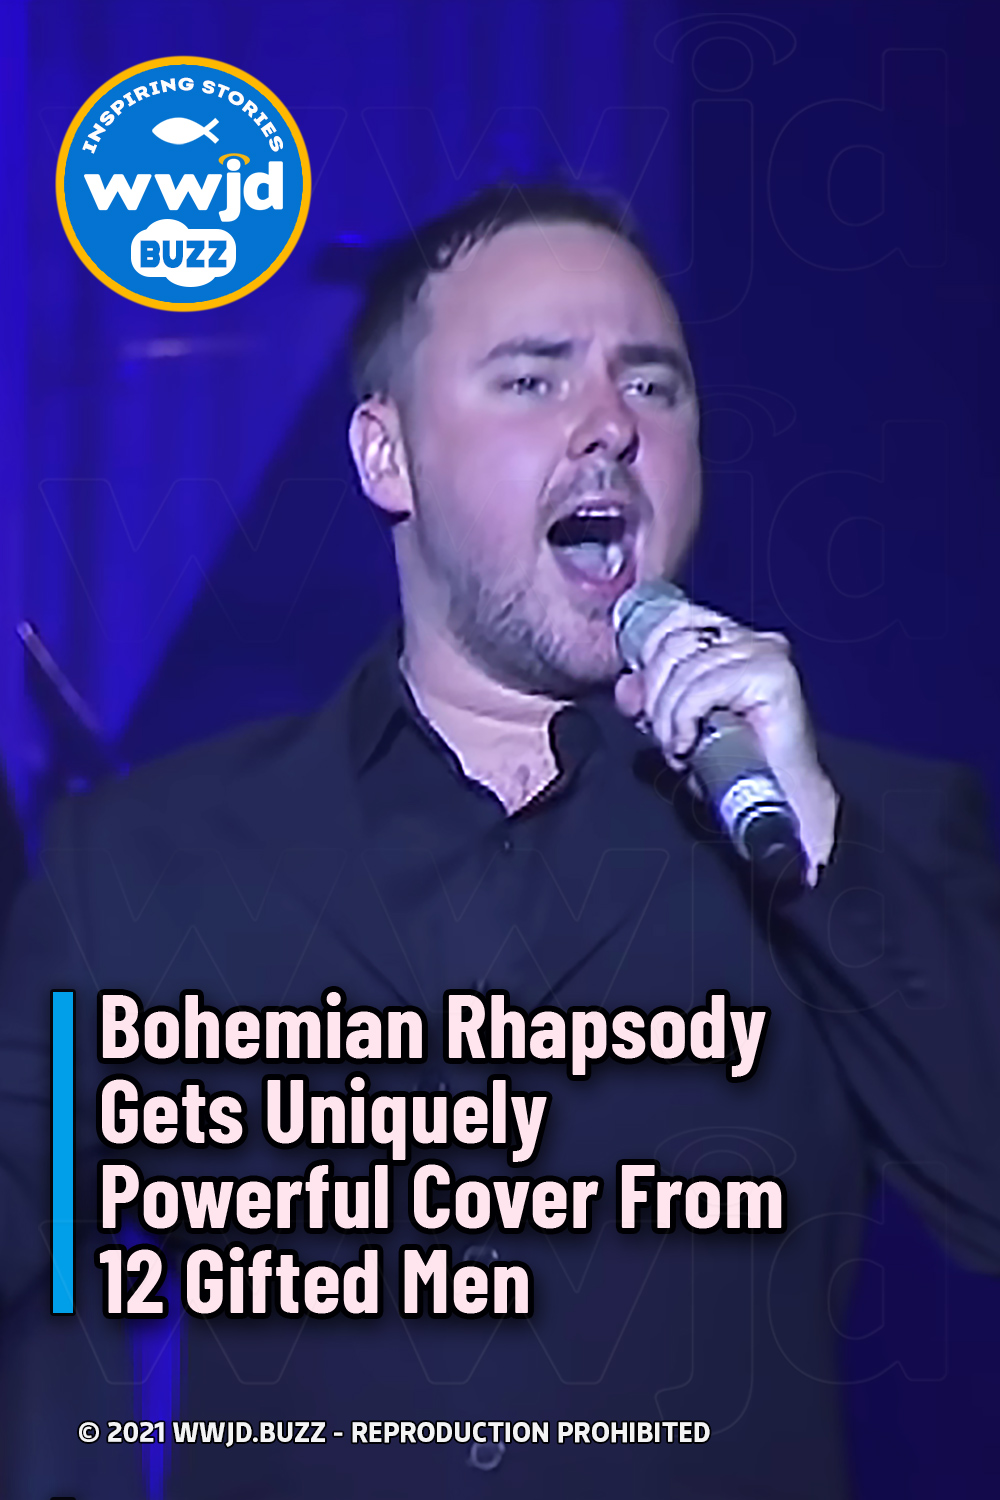 Bohemian Rhapsody Gets Uniquely Powerful Cover From 12 Gifted Men